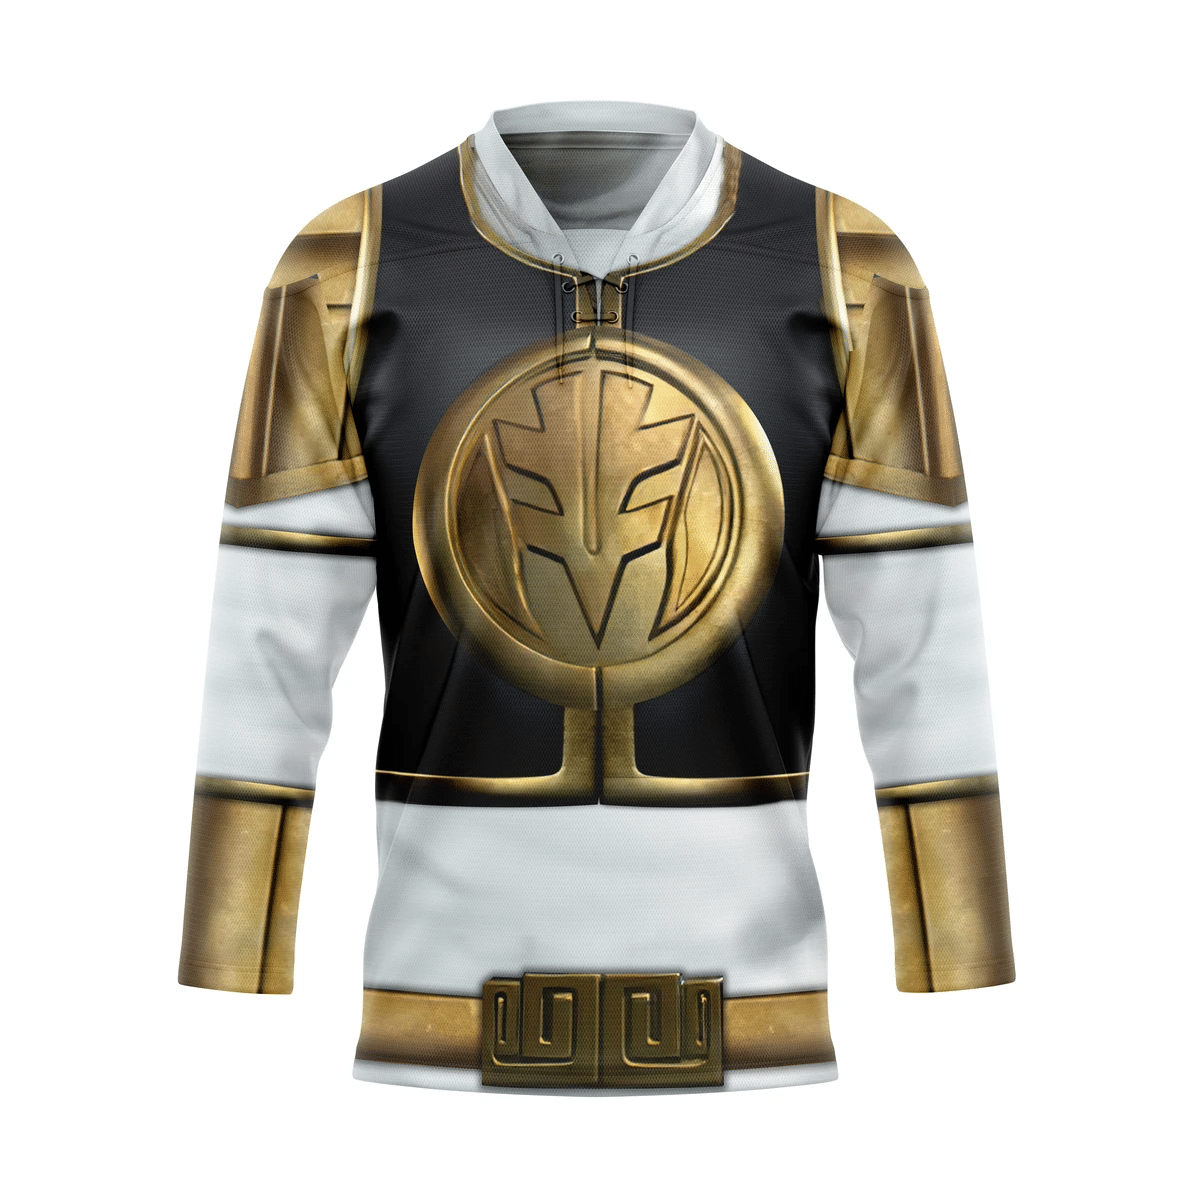 Top hot hockey jersey for NHL fans You can find out more at the bottom of the page! 59